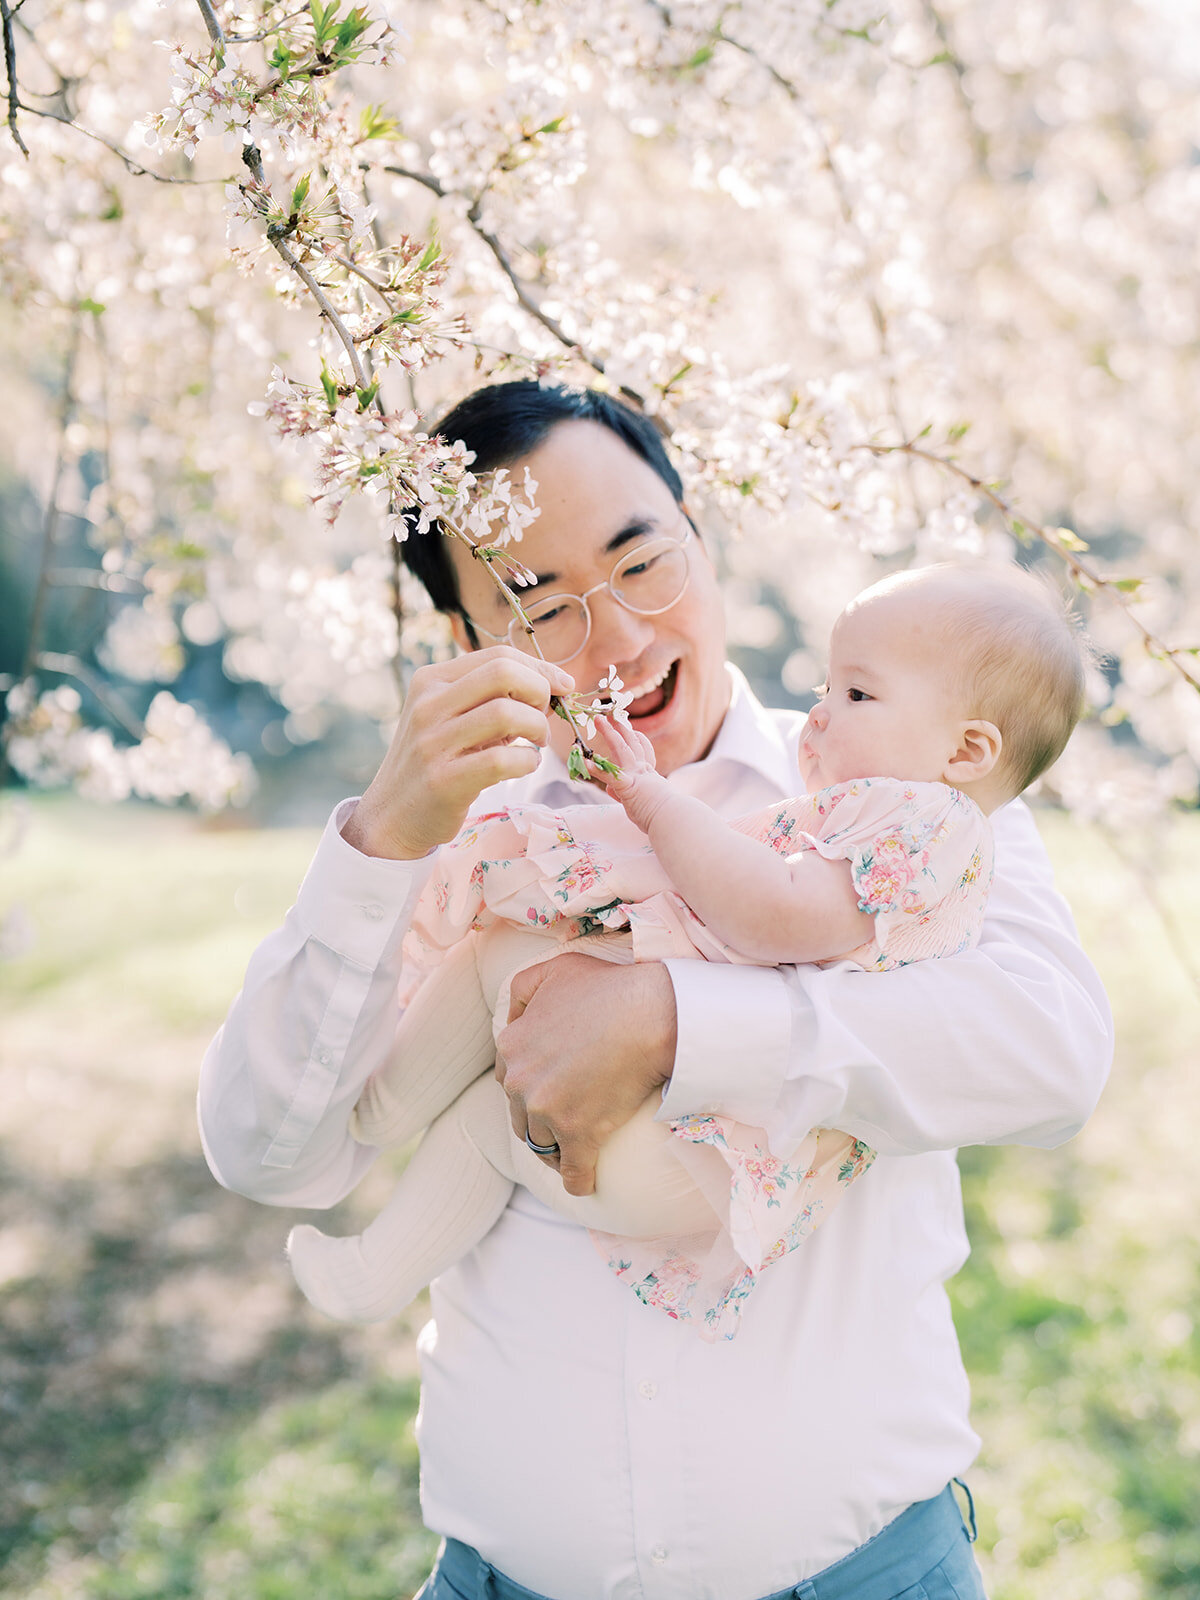 Asian father holds his baby girl up to cherry blossom branch and smiles.